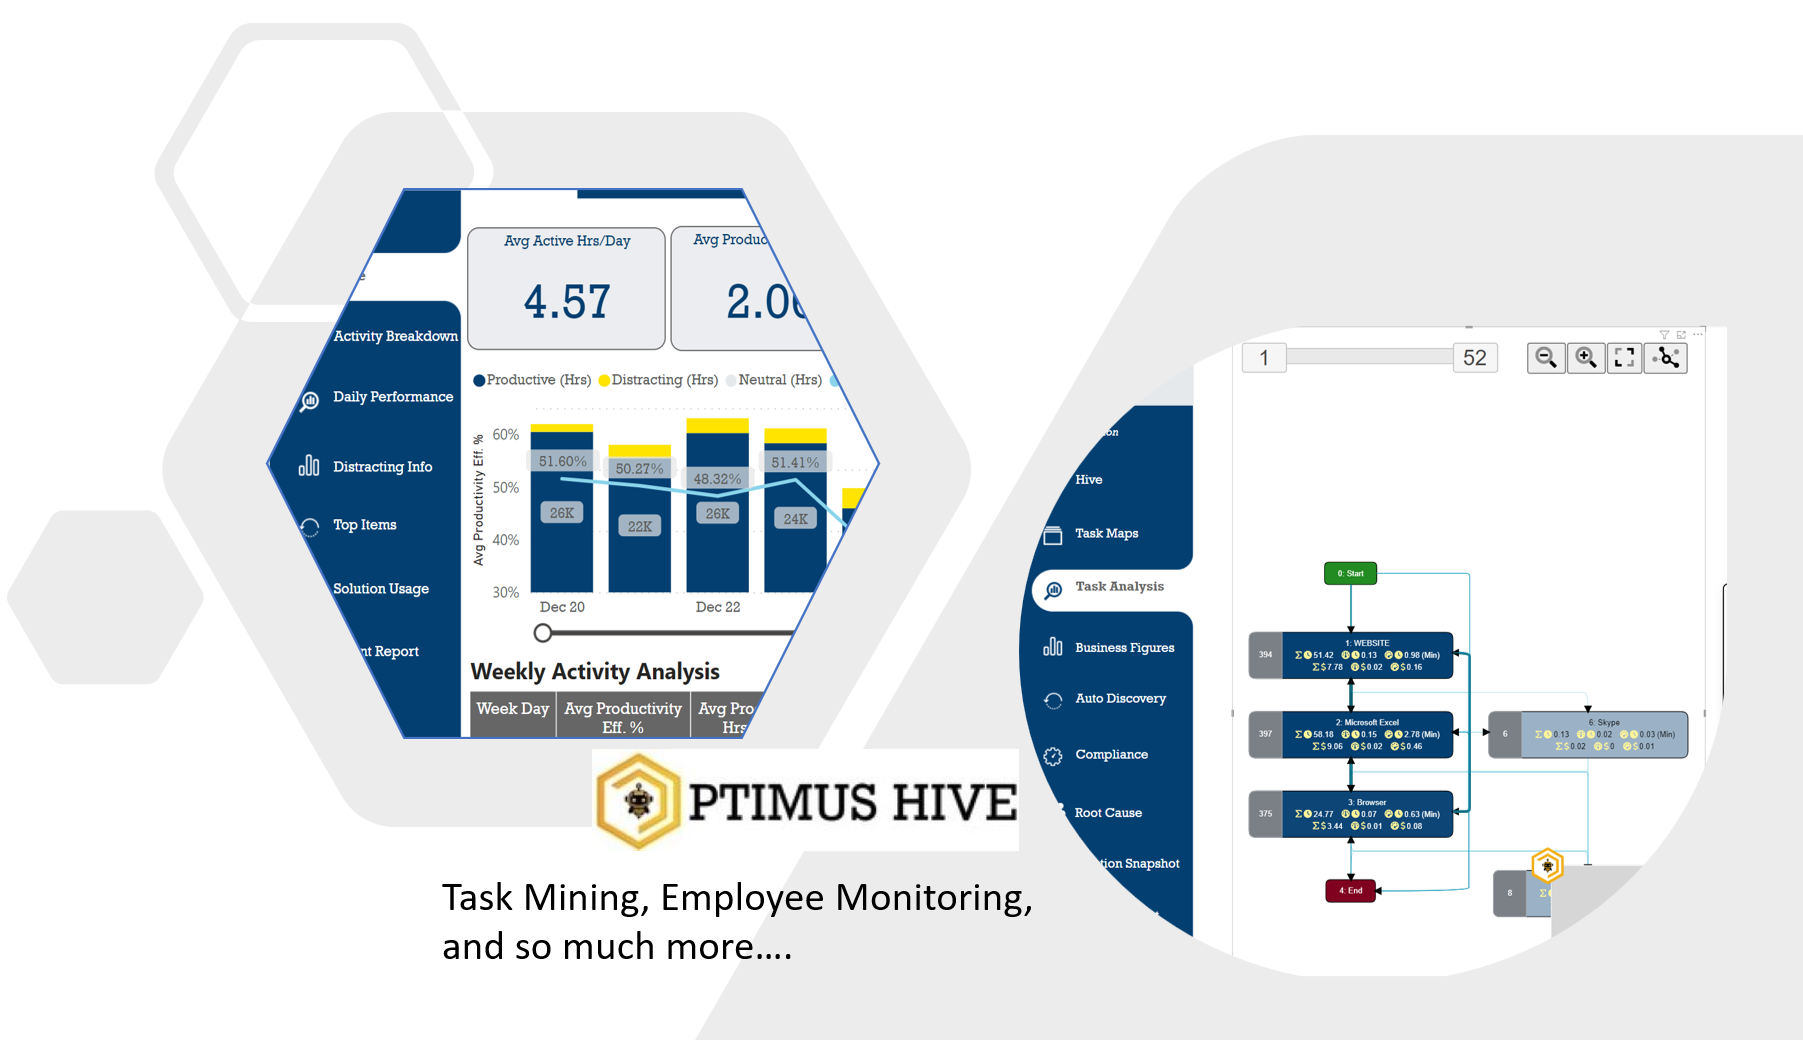 Optimus Hive extracts specific data from the agent's devices. This data provides your business with data and analytics information to identify automation opportunities, improve the employee experience and increase workers' productivity.